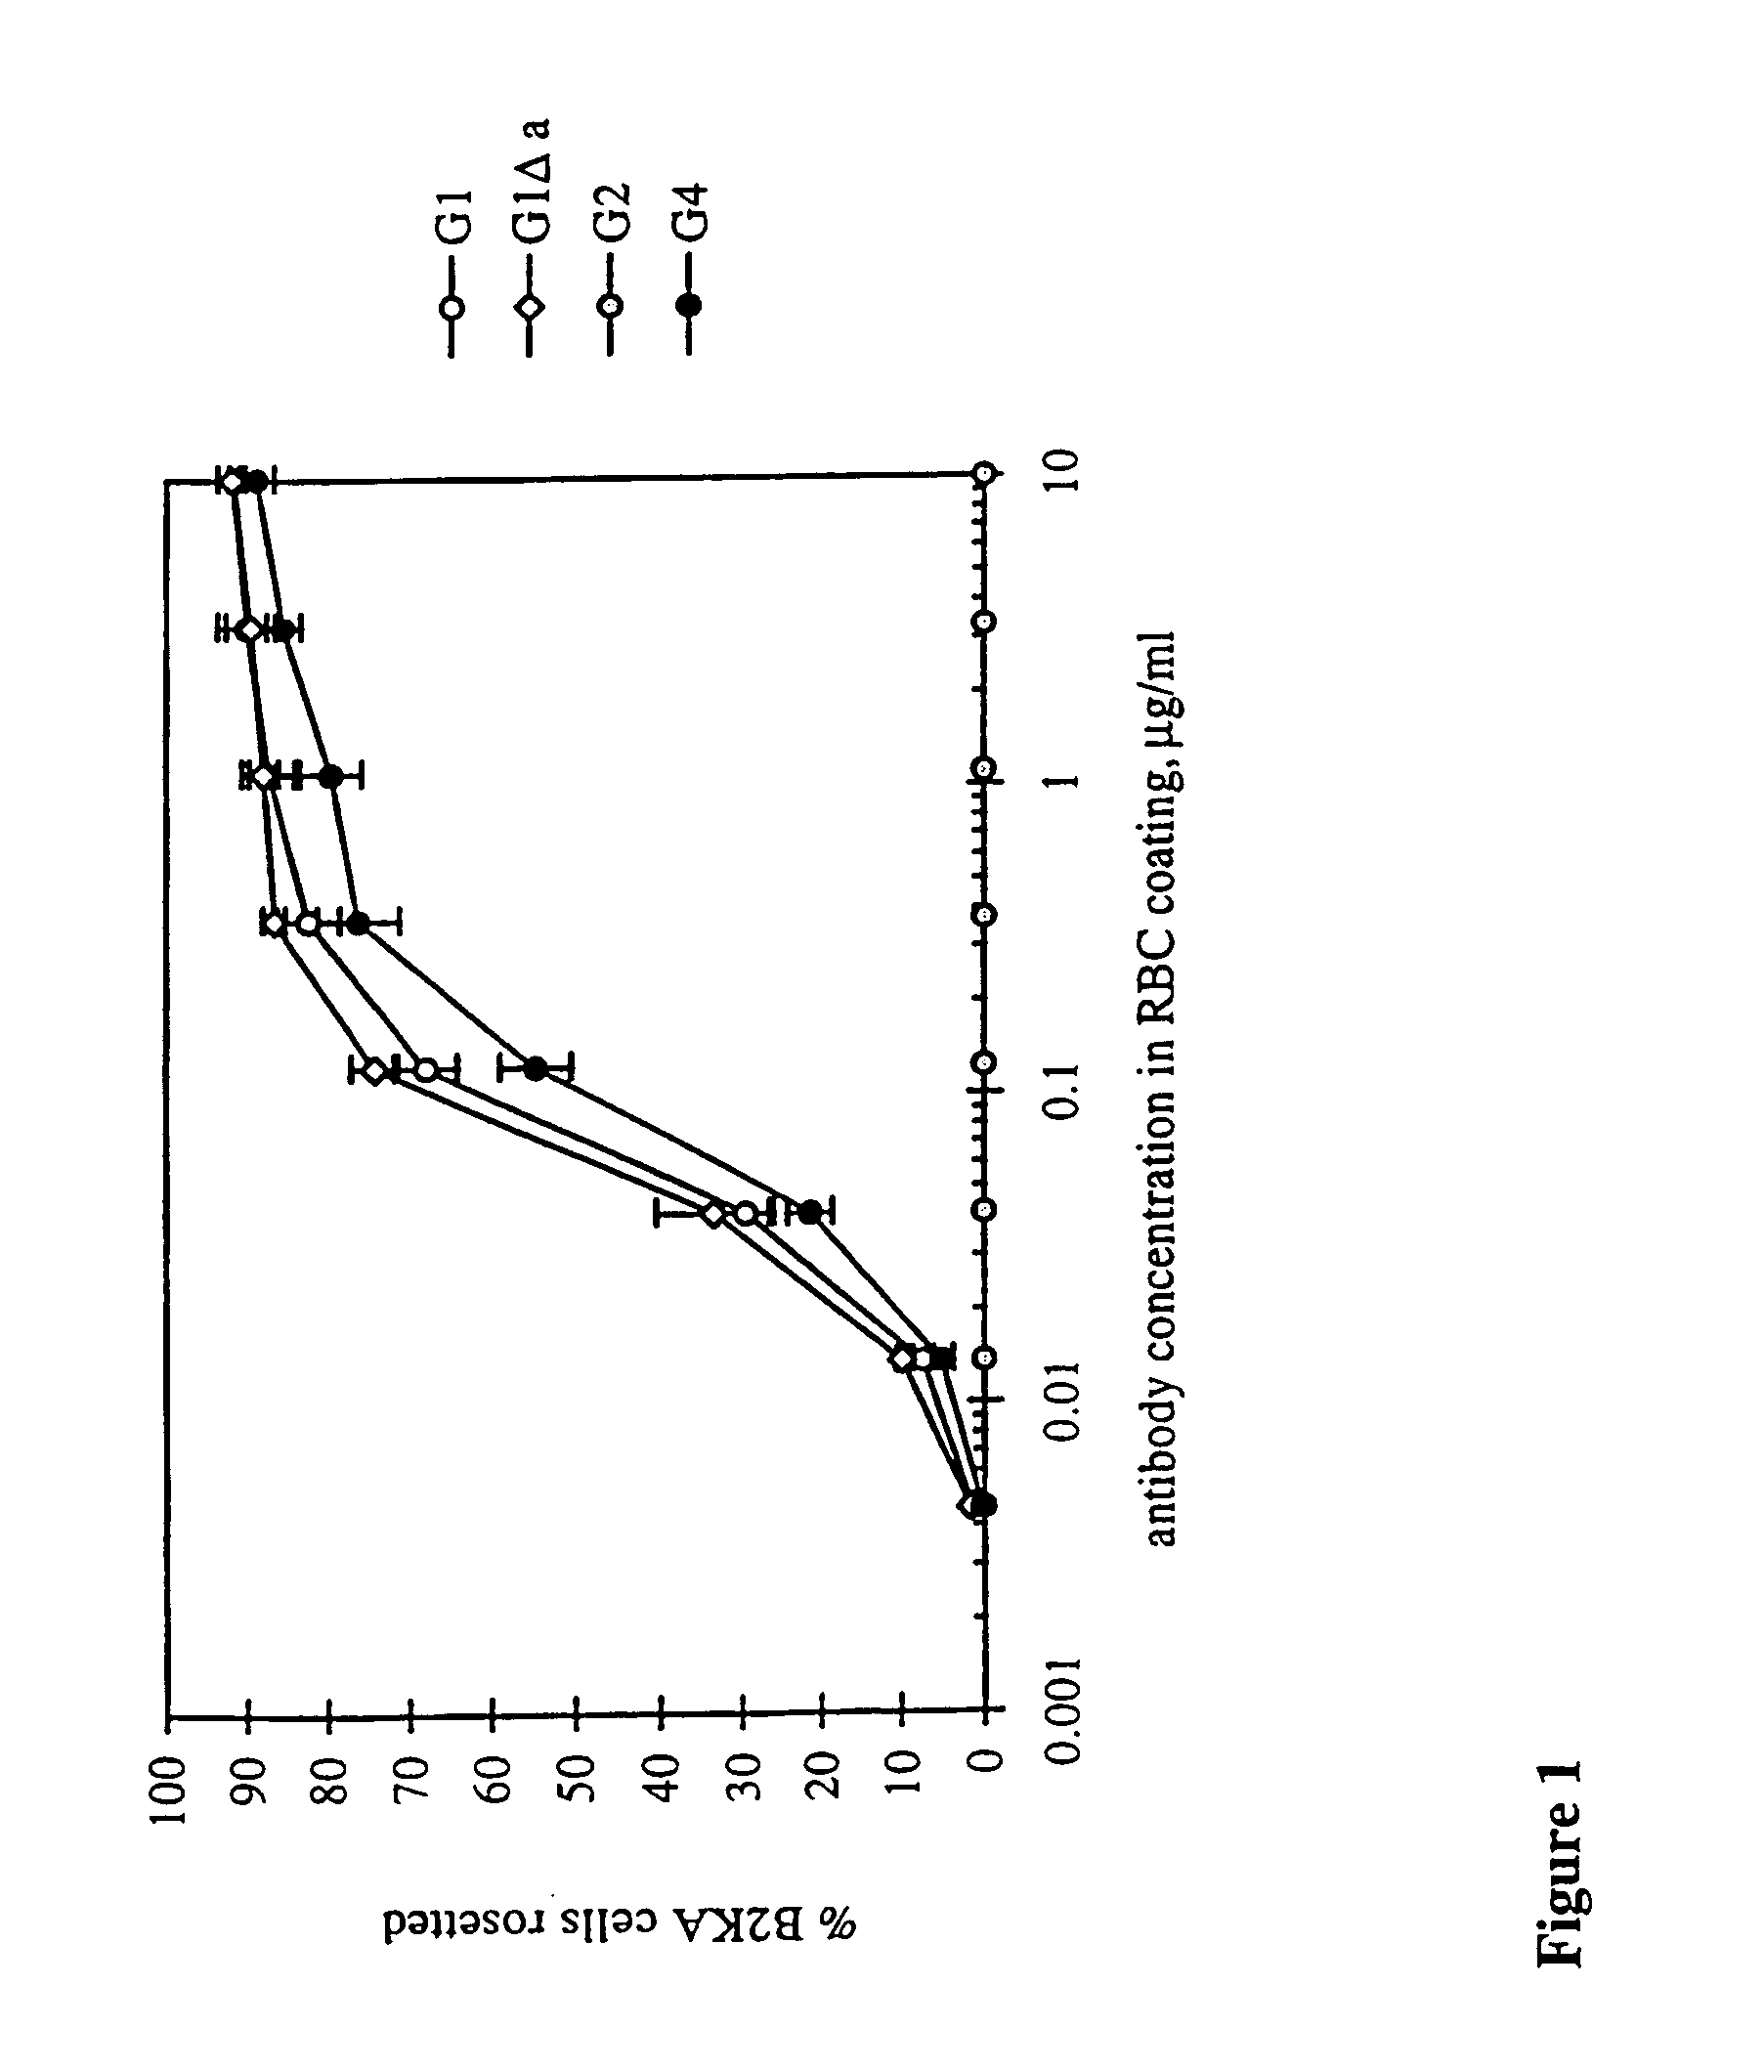 Binding molecules derived from immunoglobulins which do not trigger complement mediated lysis